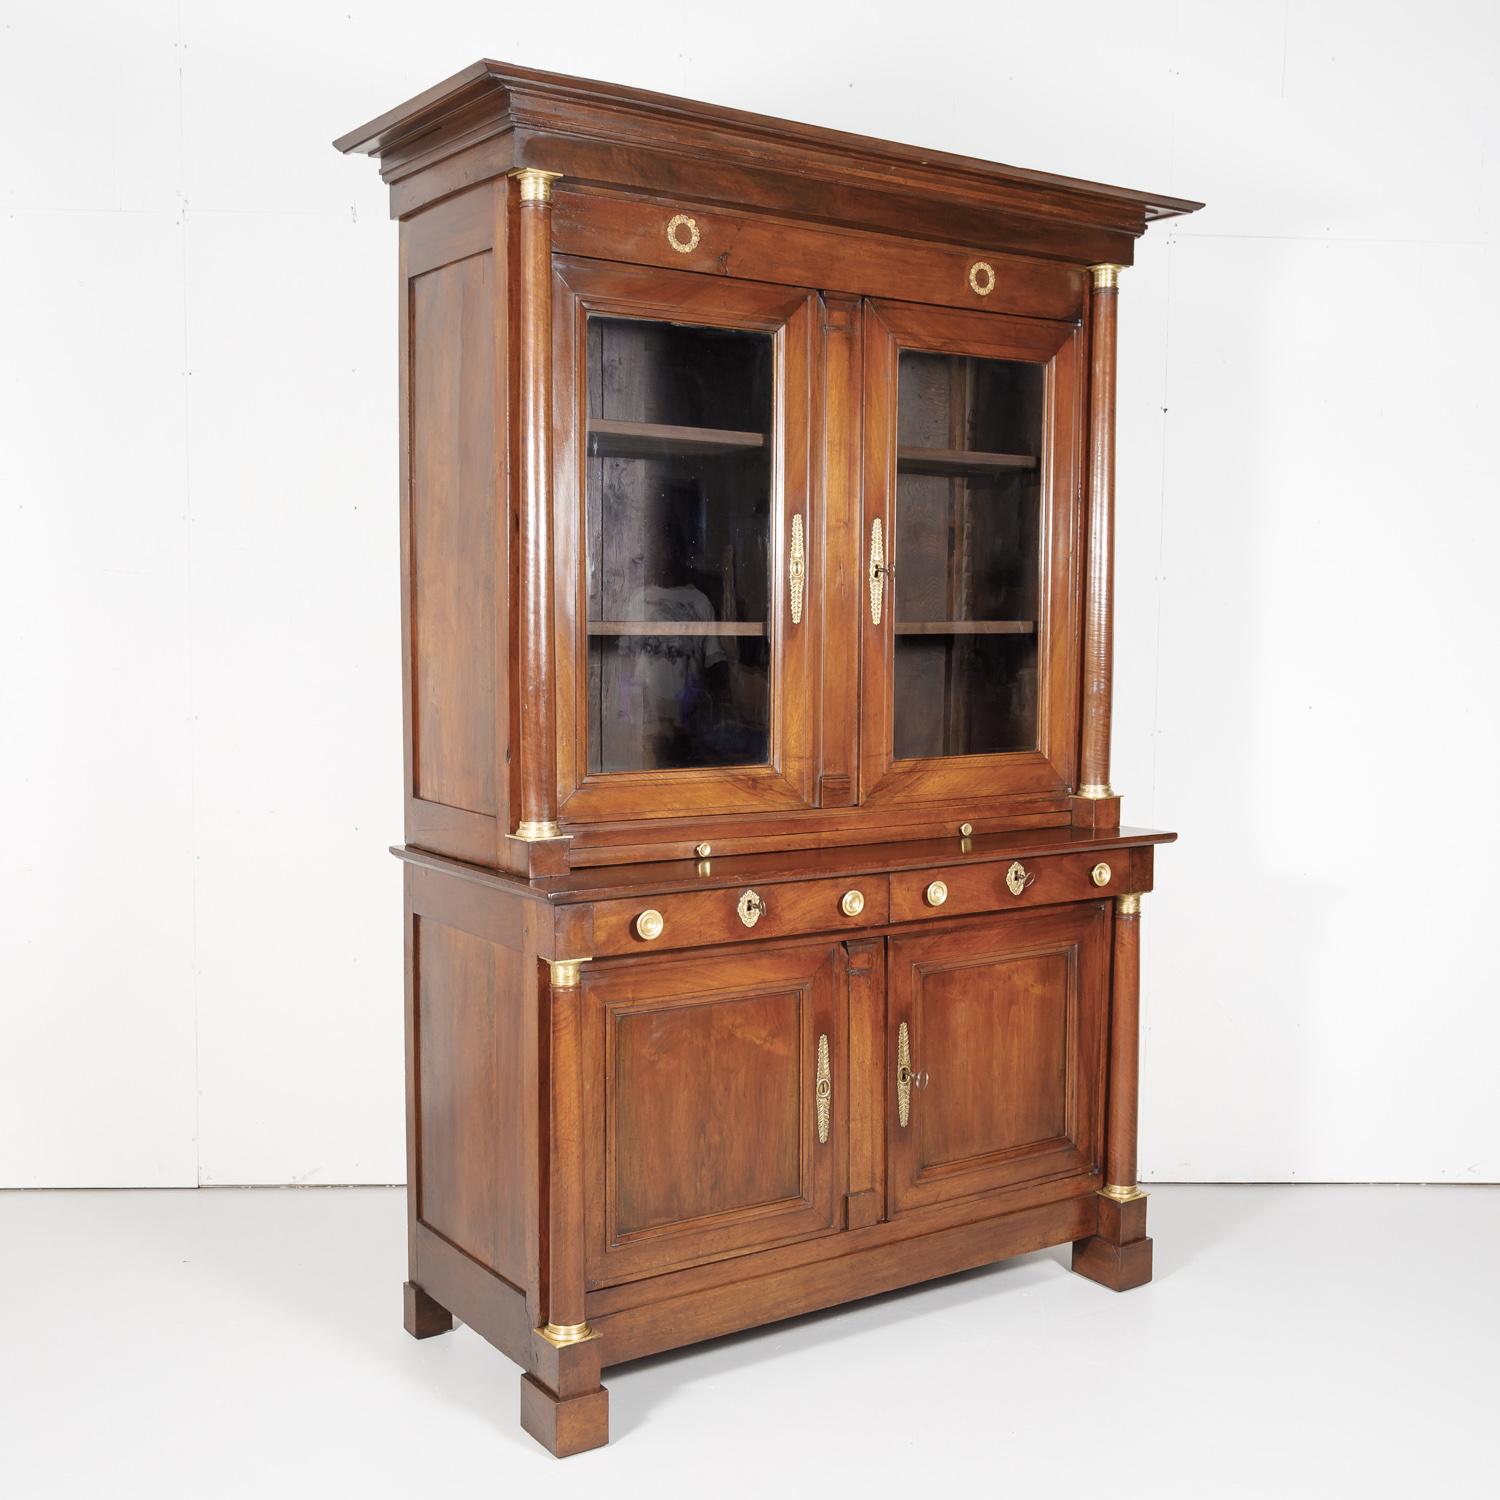 A fine French Empire period bibliotheque handcrafted from select French walnut by skilled artisans from Lyon during the First Empire of Napoleon, circa early 1800s. The upper bookcase of this grand piece boasts a stepped cornice over a frieze with